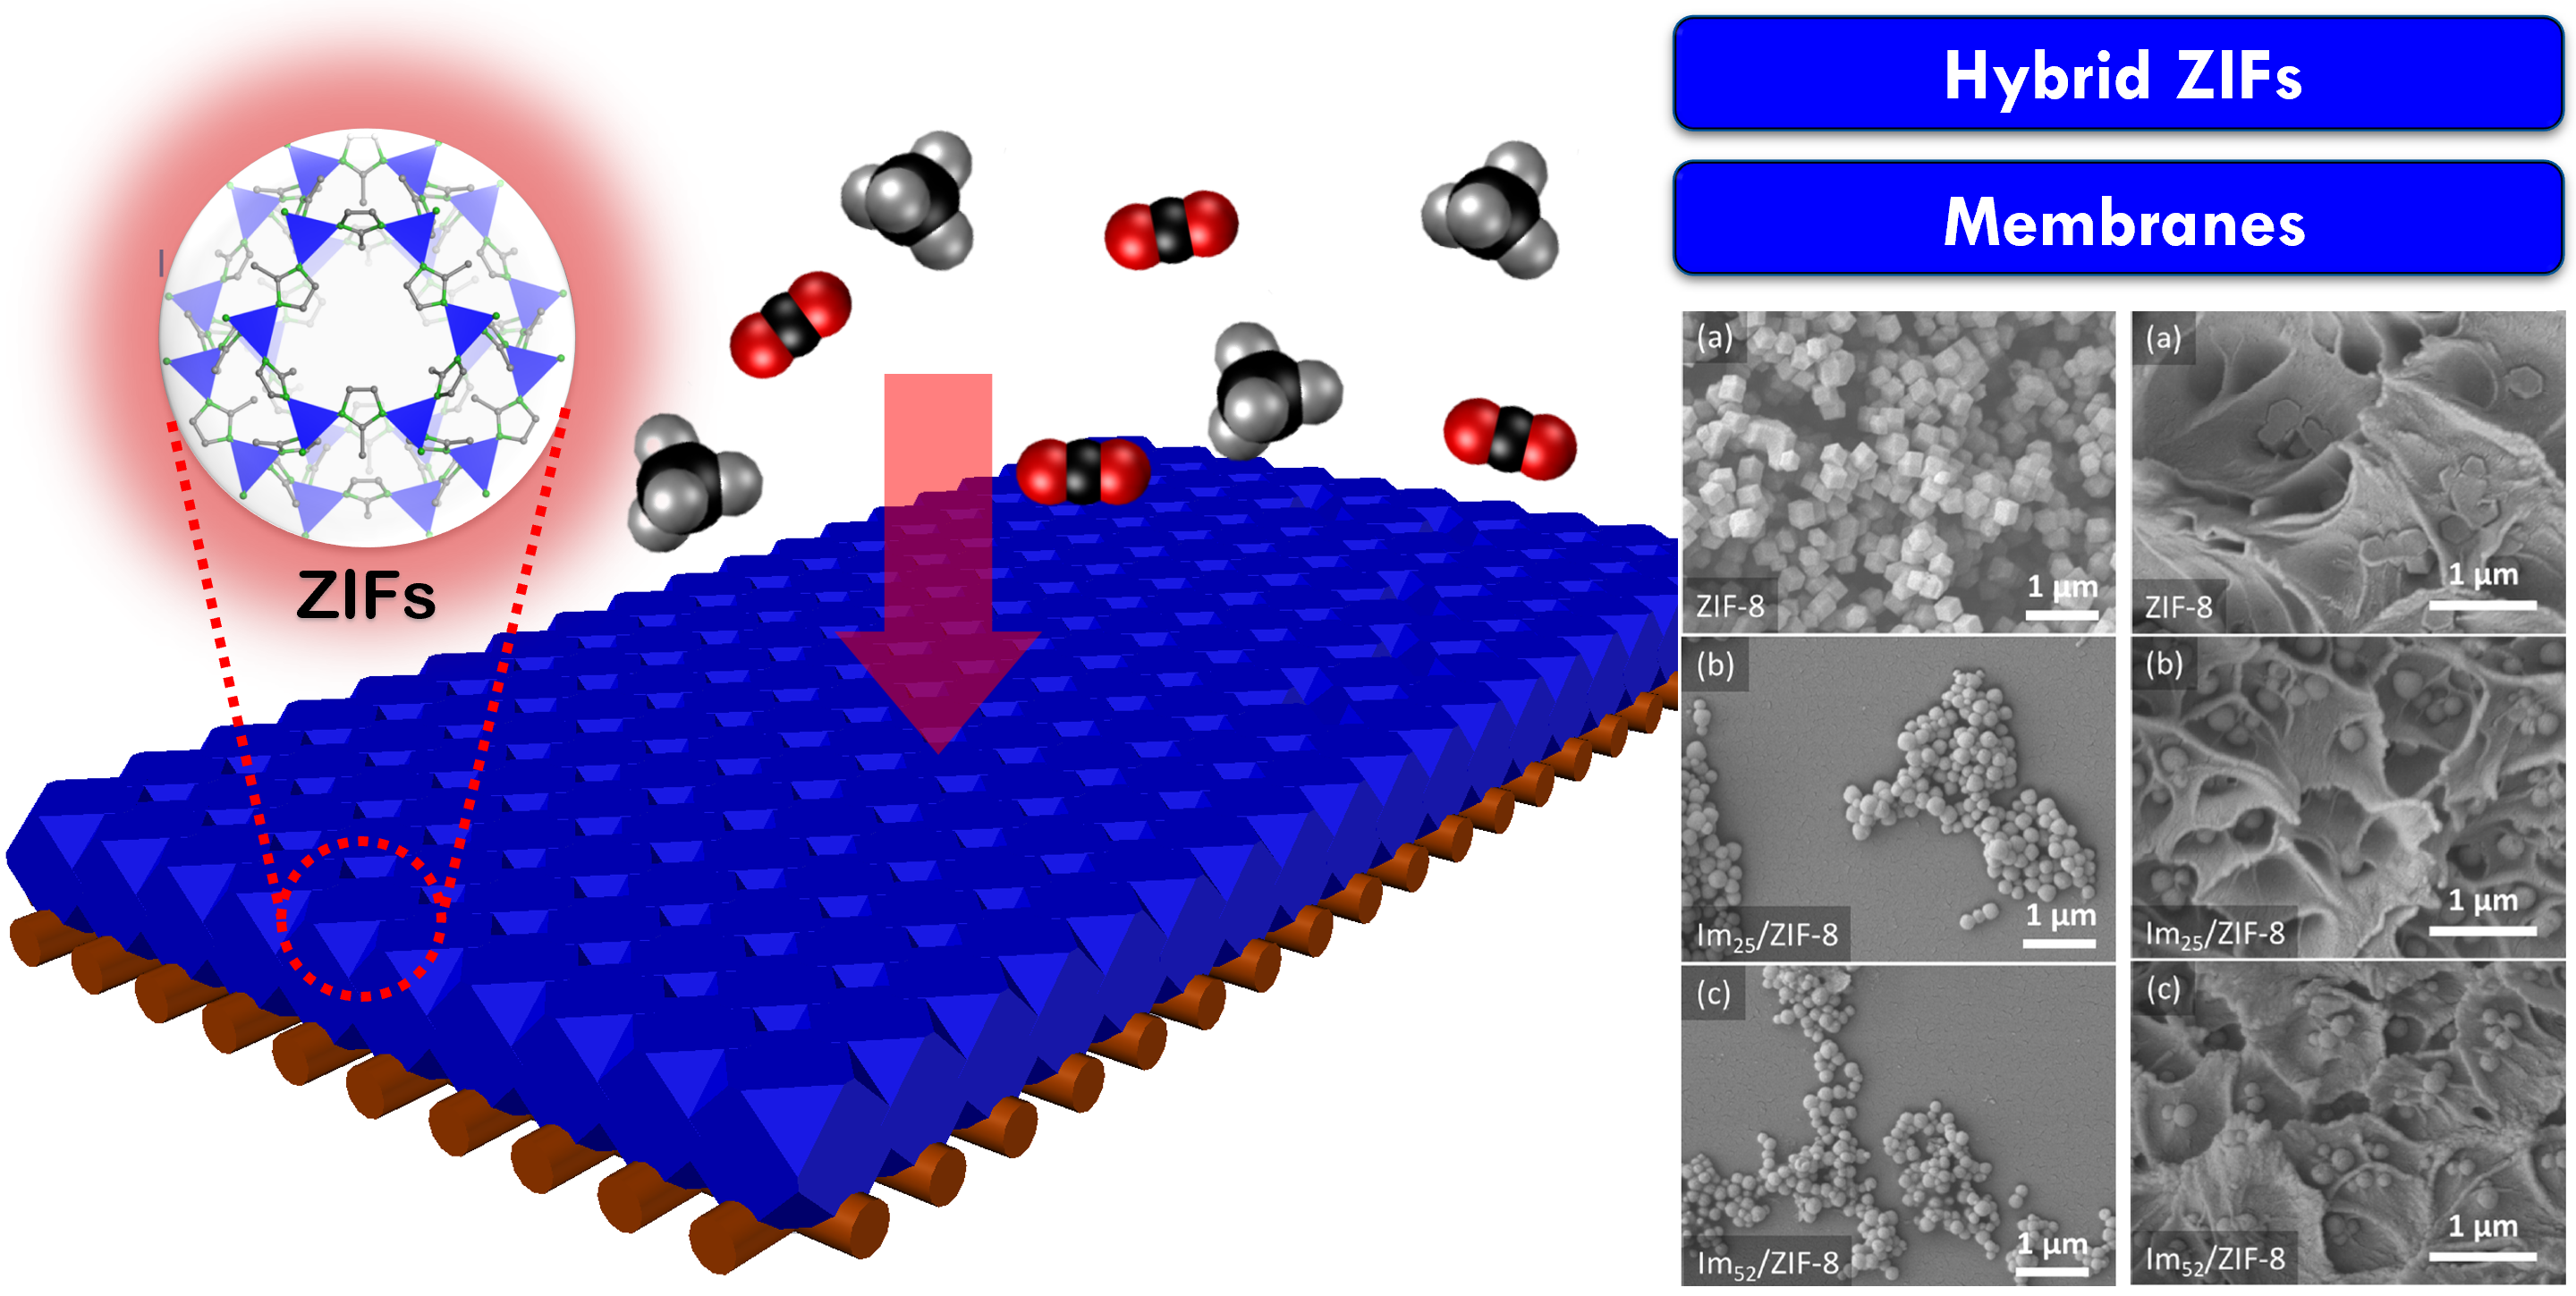 TUNING APERTURE OF POROUS METAL-ORGANIC FRAMEWORKS FOR CO2 CAPTURE APPLICATIONS